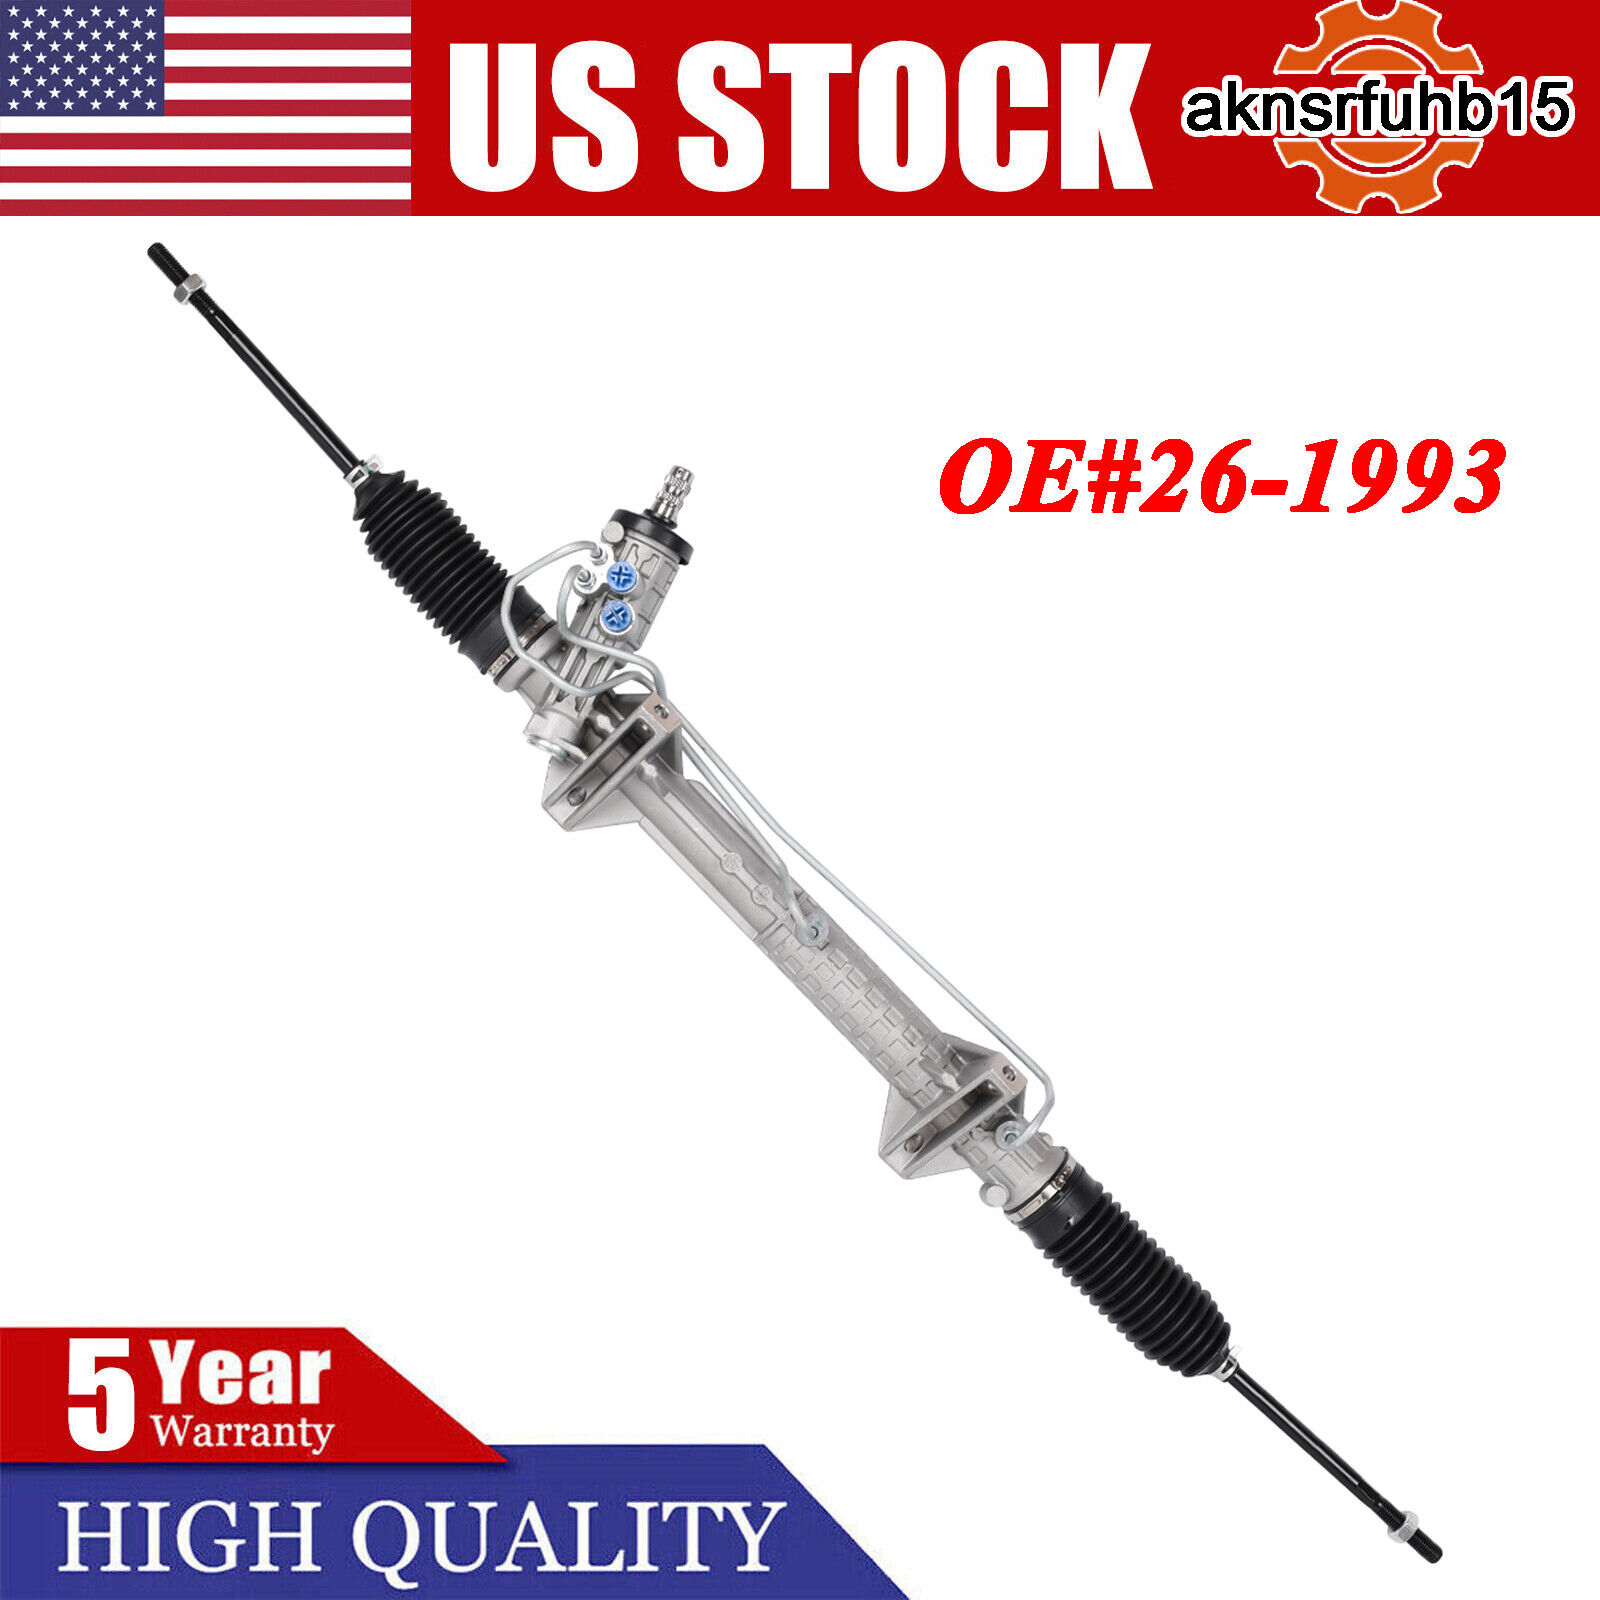 Power Steering Rack & Pinion Assembly for Volvo 740 745 760 780 940 960 26-1993